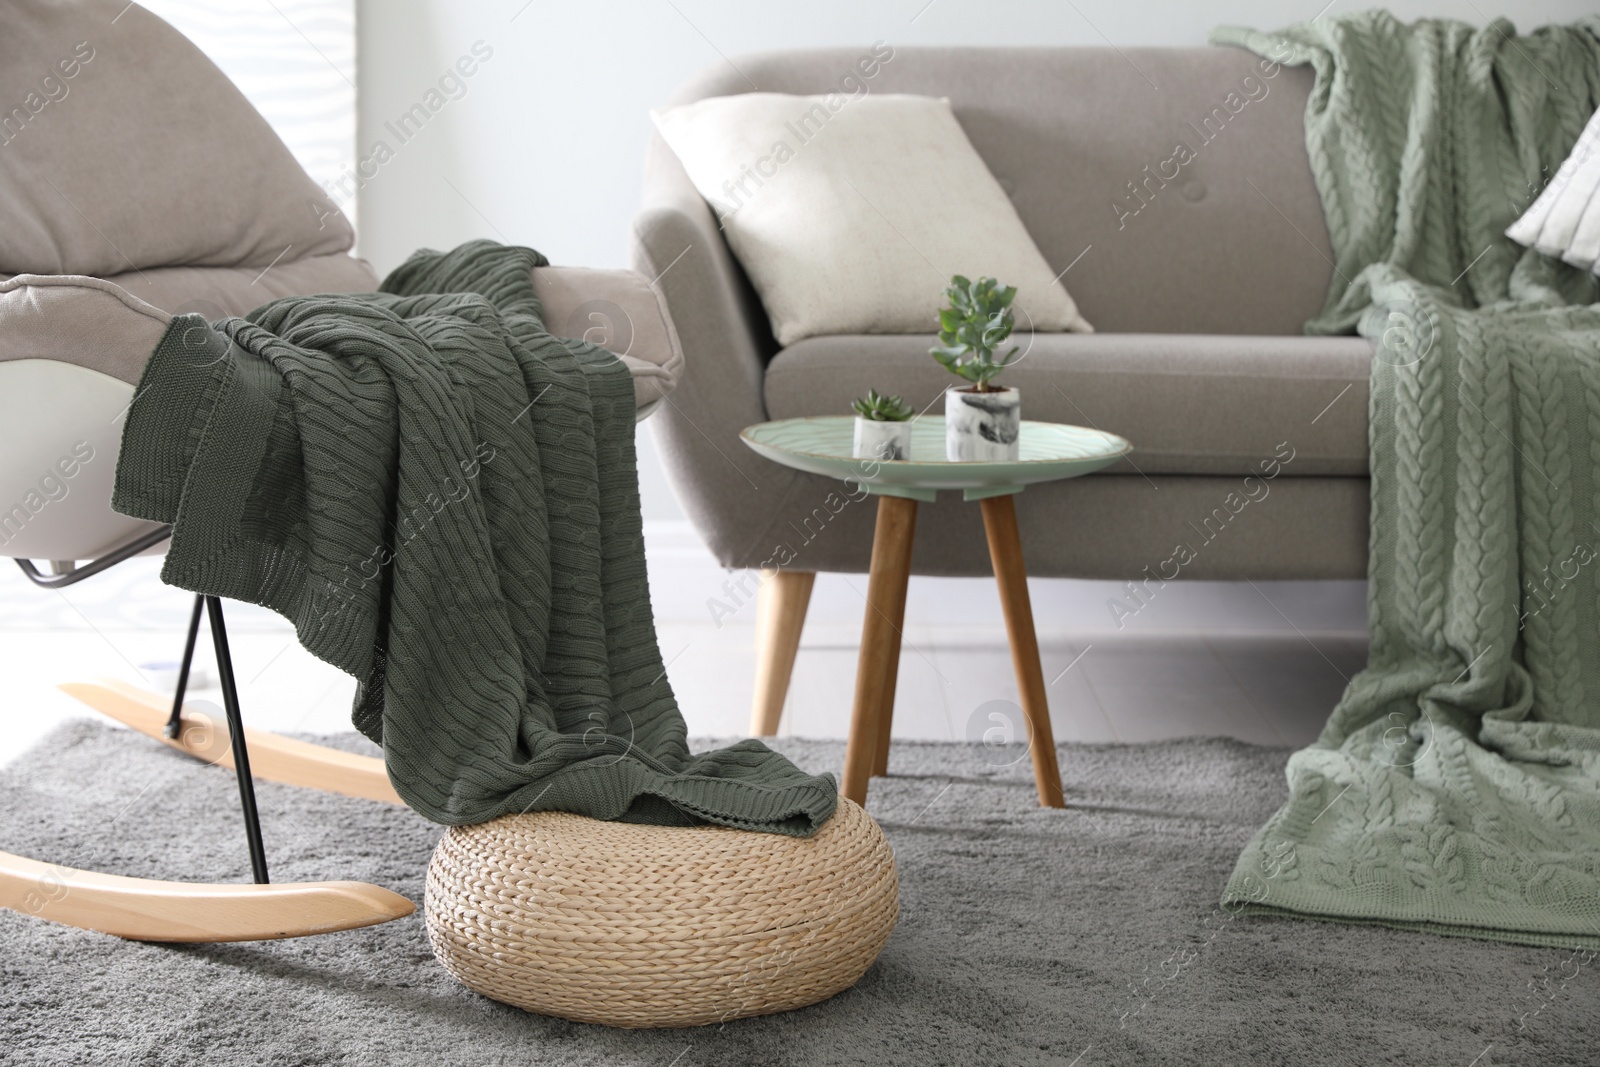 Photo of Soft knitted blanket on armchair in room. Home interior